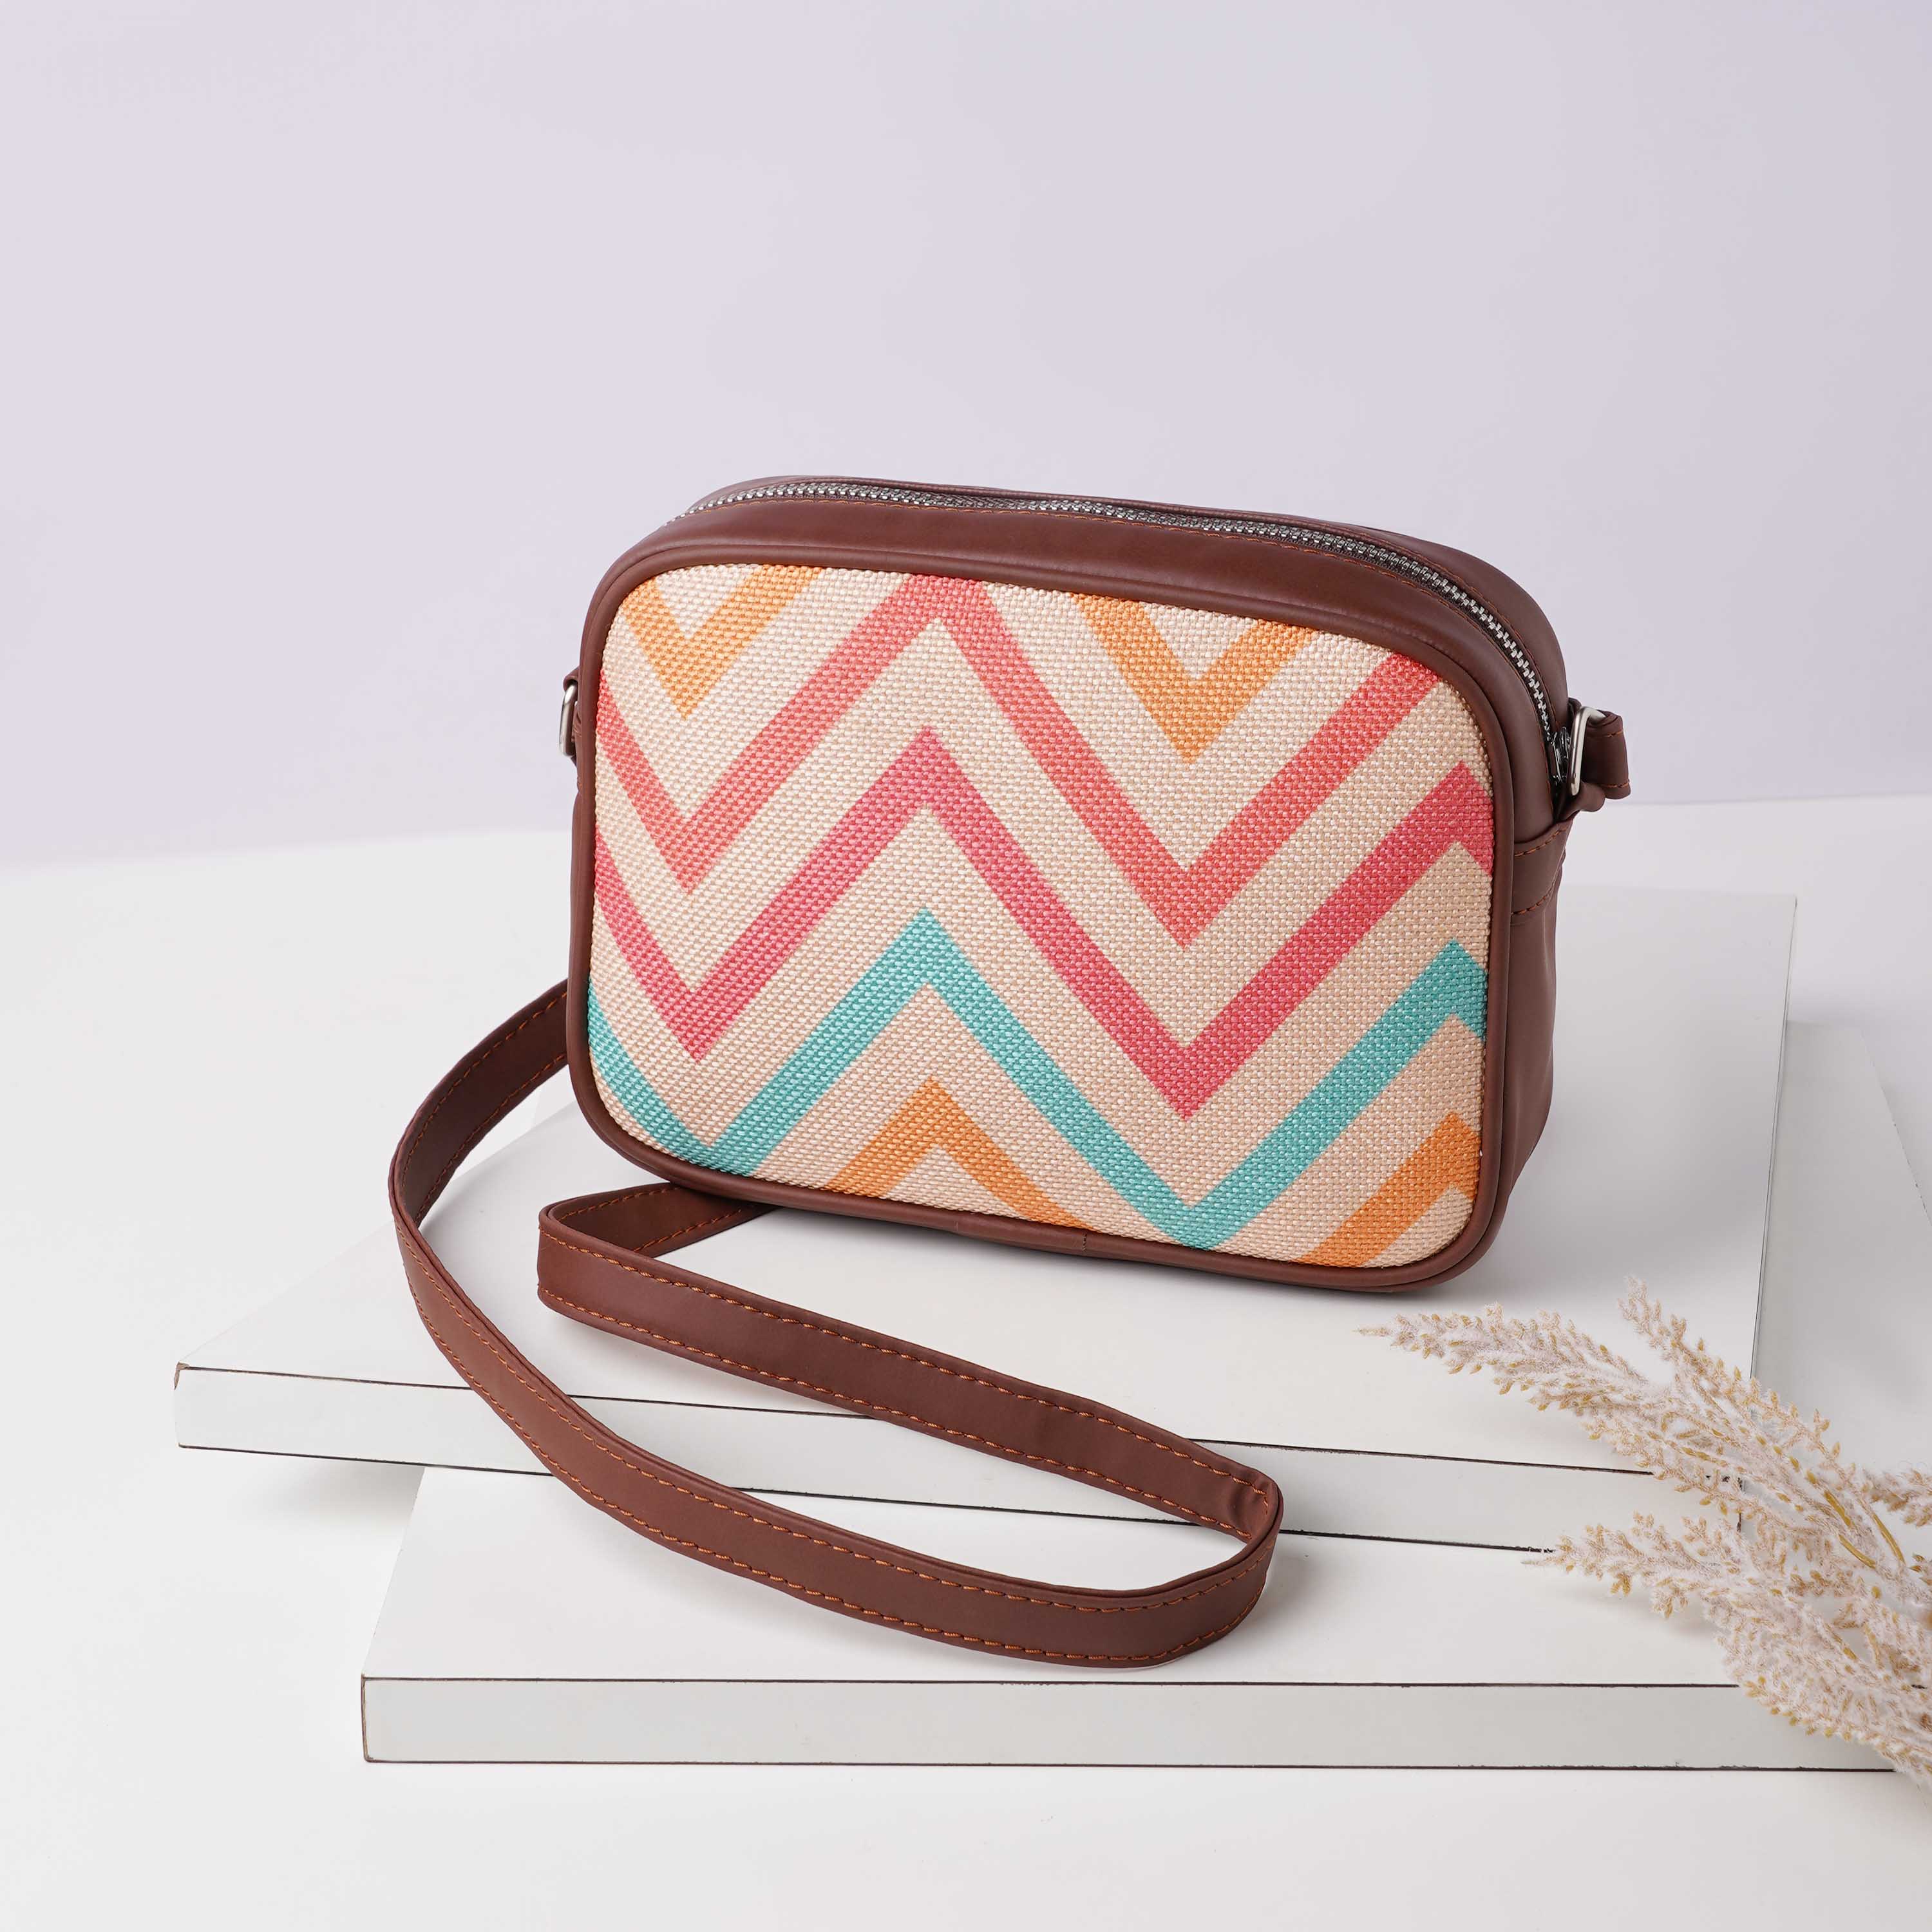 Shop For Women's Sling Bags Online At Best Prices | LBB